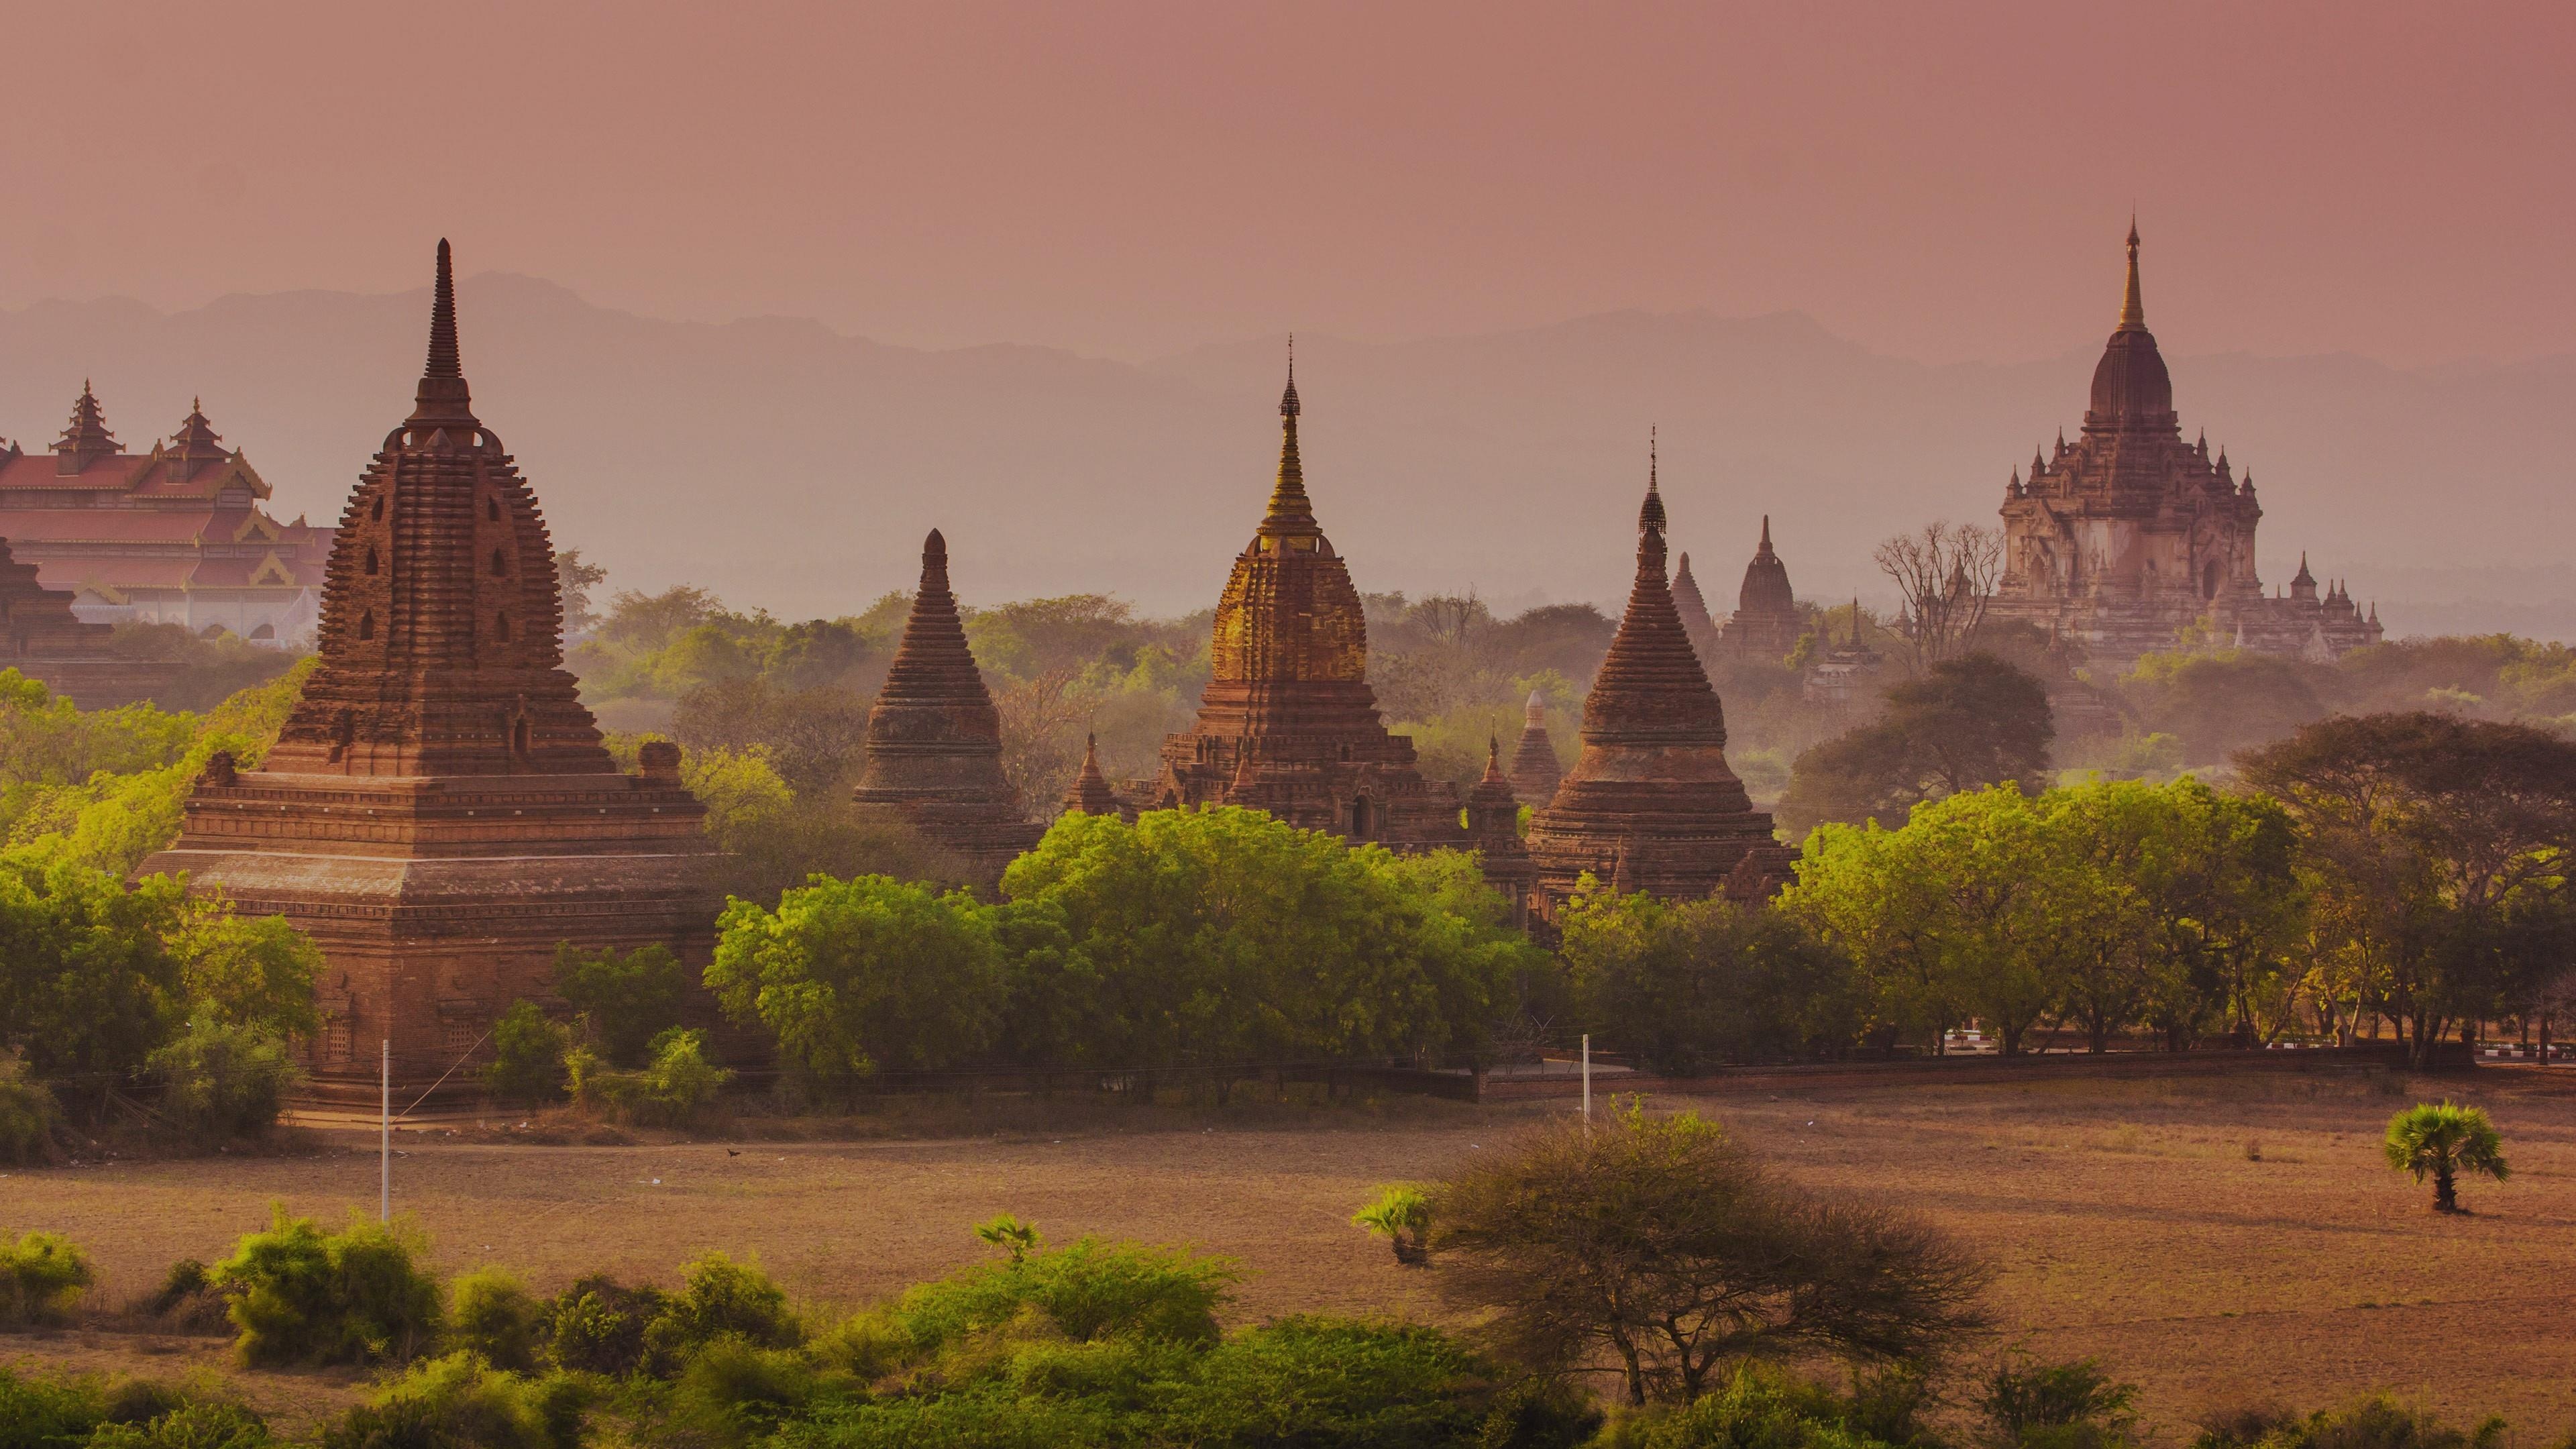 Myanmar: Burma, The largest country by area in Mainland Southeast Asia. 3840x2160 4K Wallpaper.